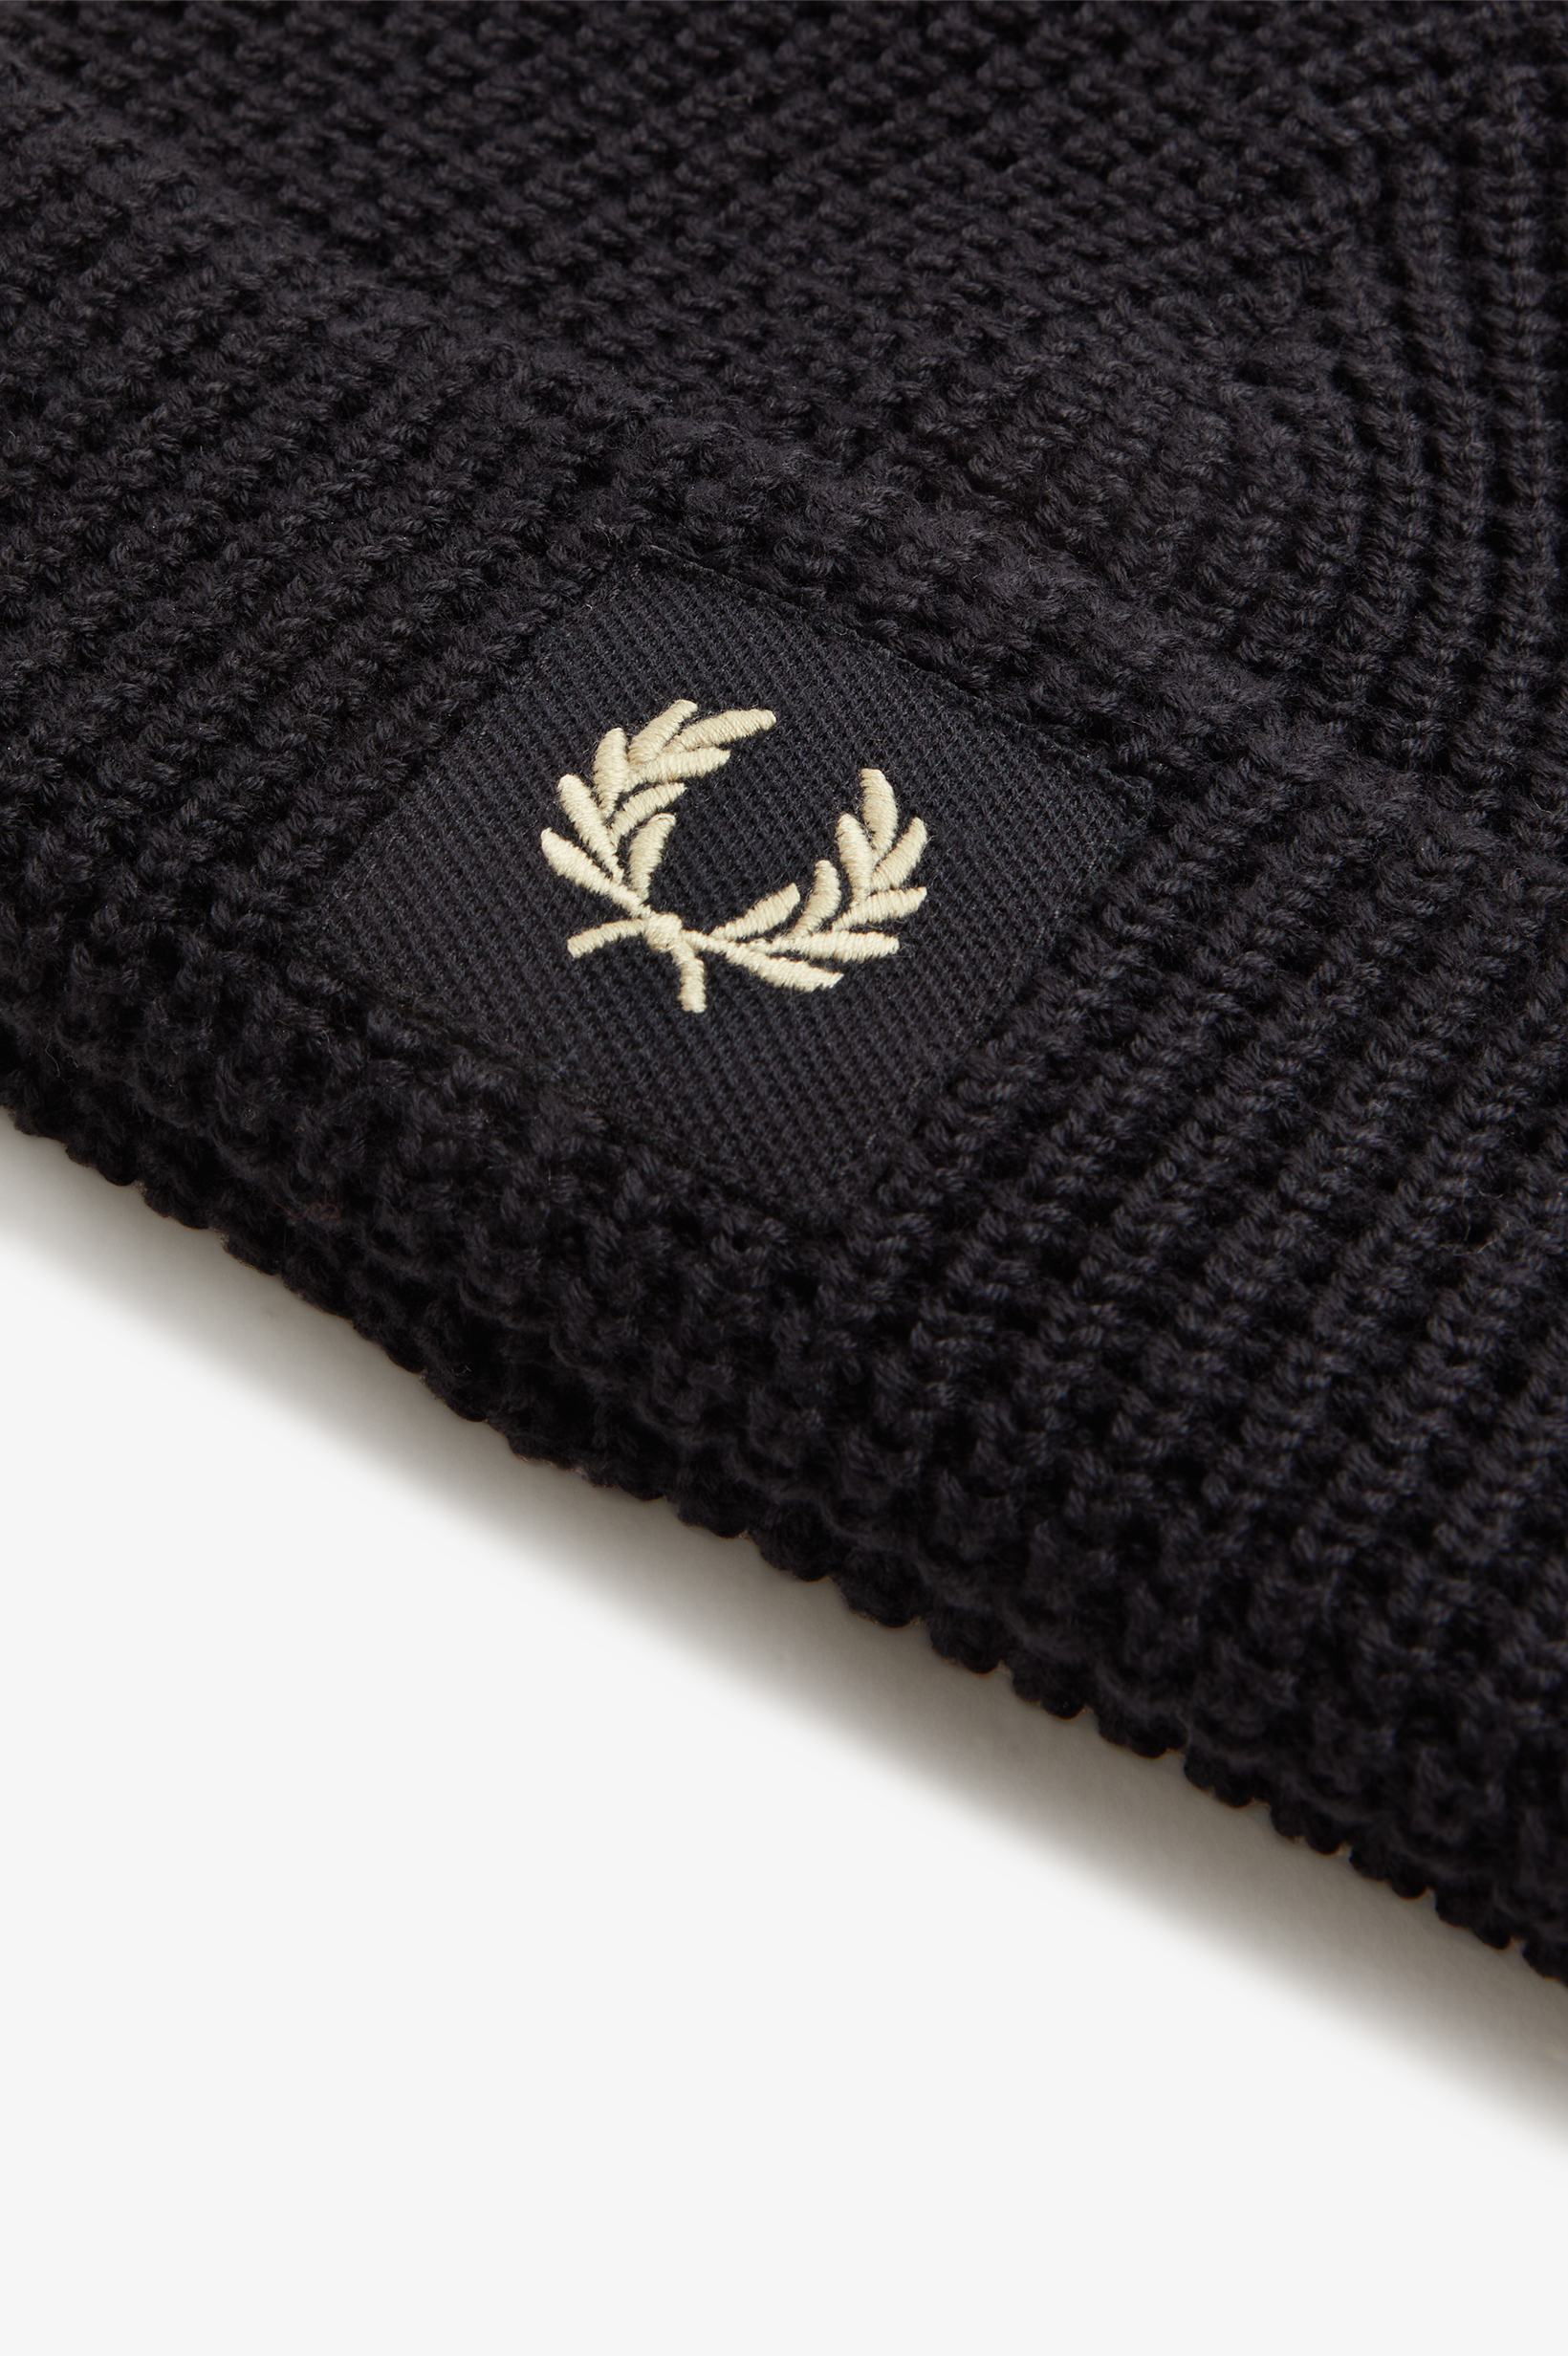 Fred Perry - PATCH BRAND WAFFLE KNIT BEANIE - Black/Oatmeal